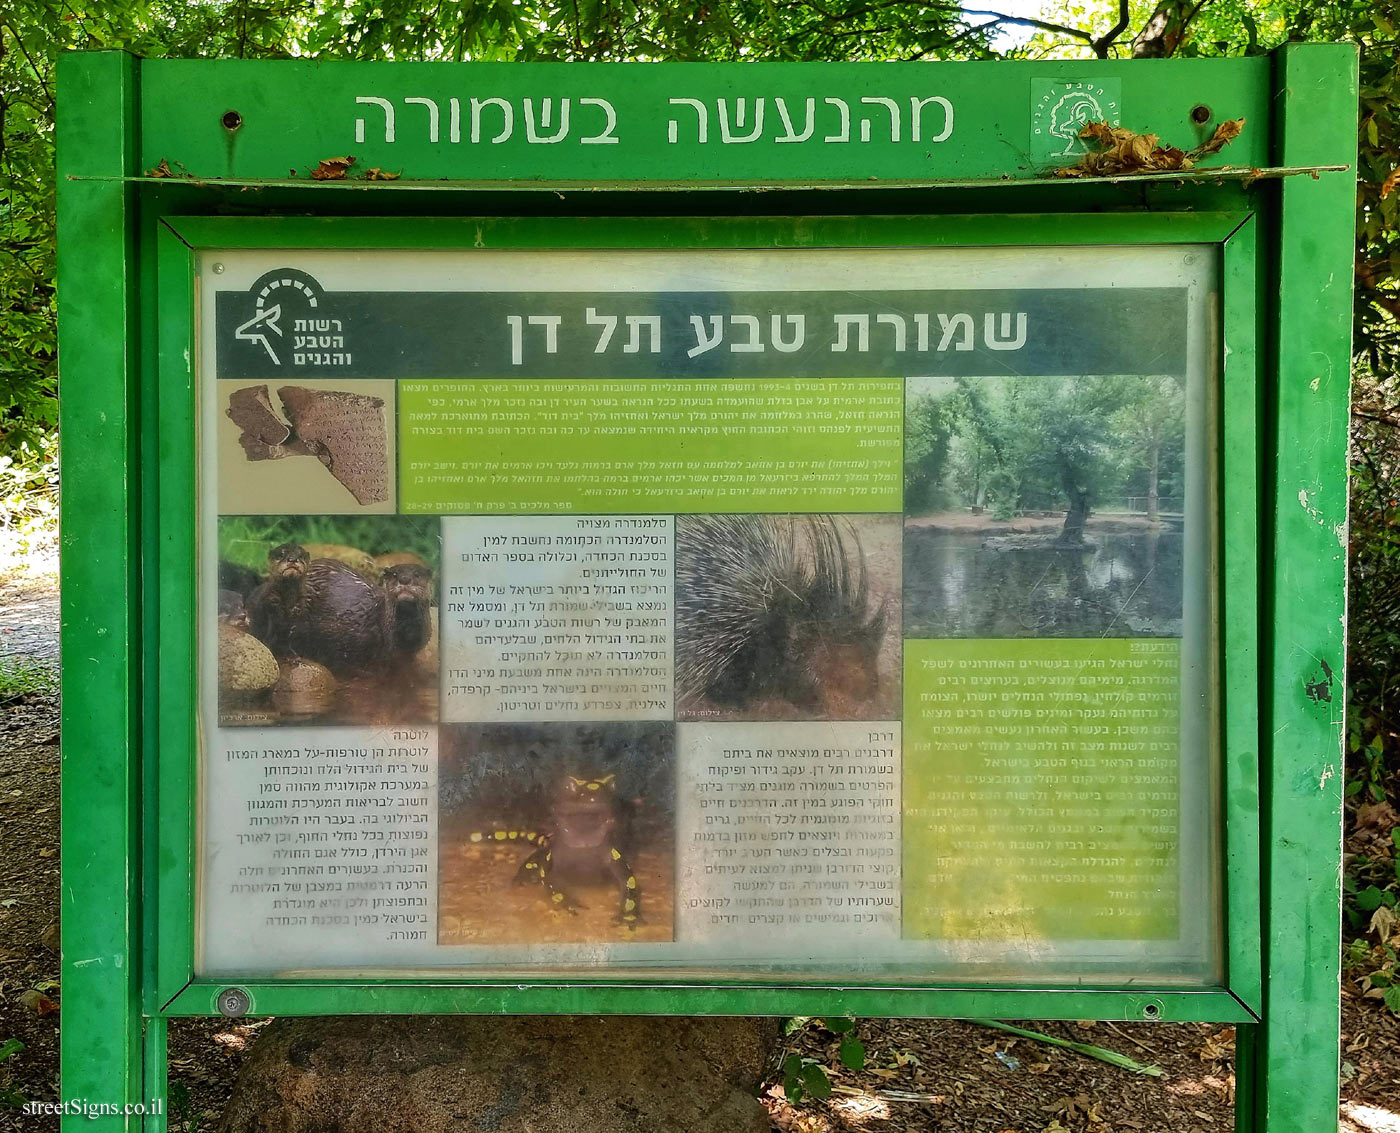 Tel Dan Nature Reserve - from what is happening in the reserve